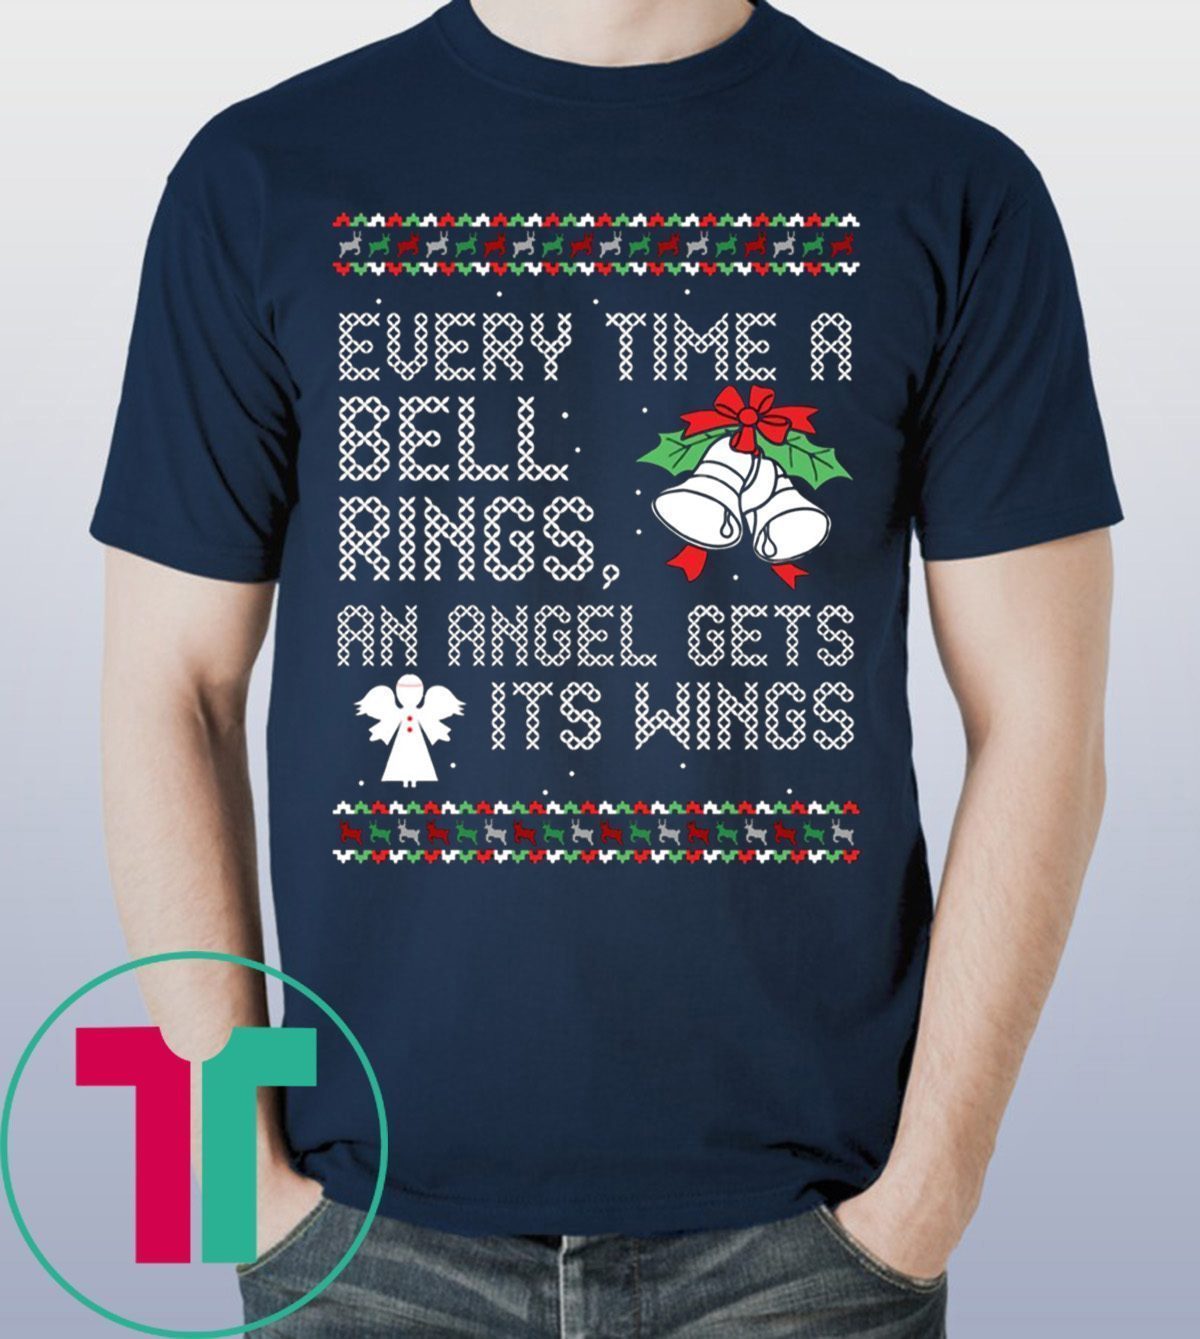 Every Time Bell Rings Angel Gets Its Wings Christmas Shirt ...